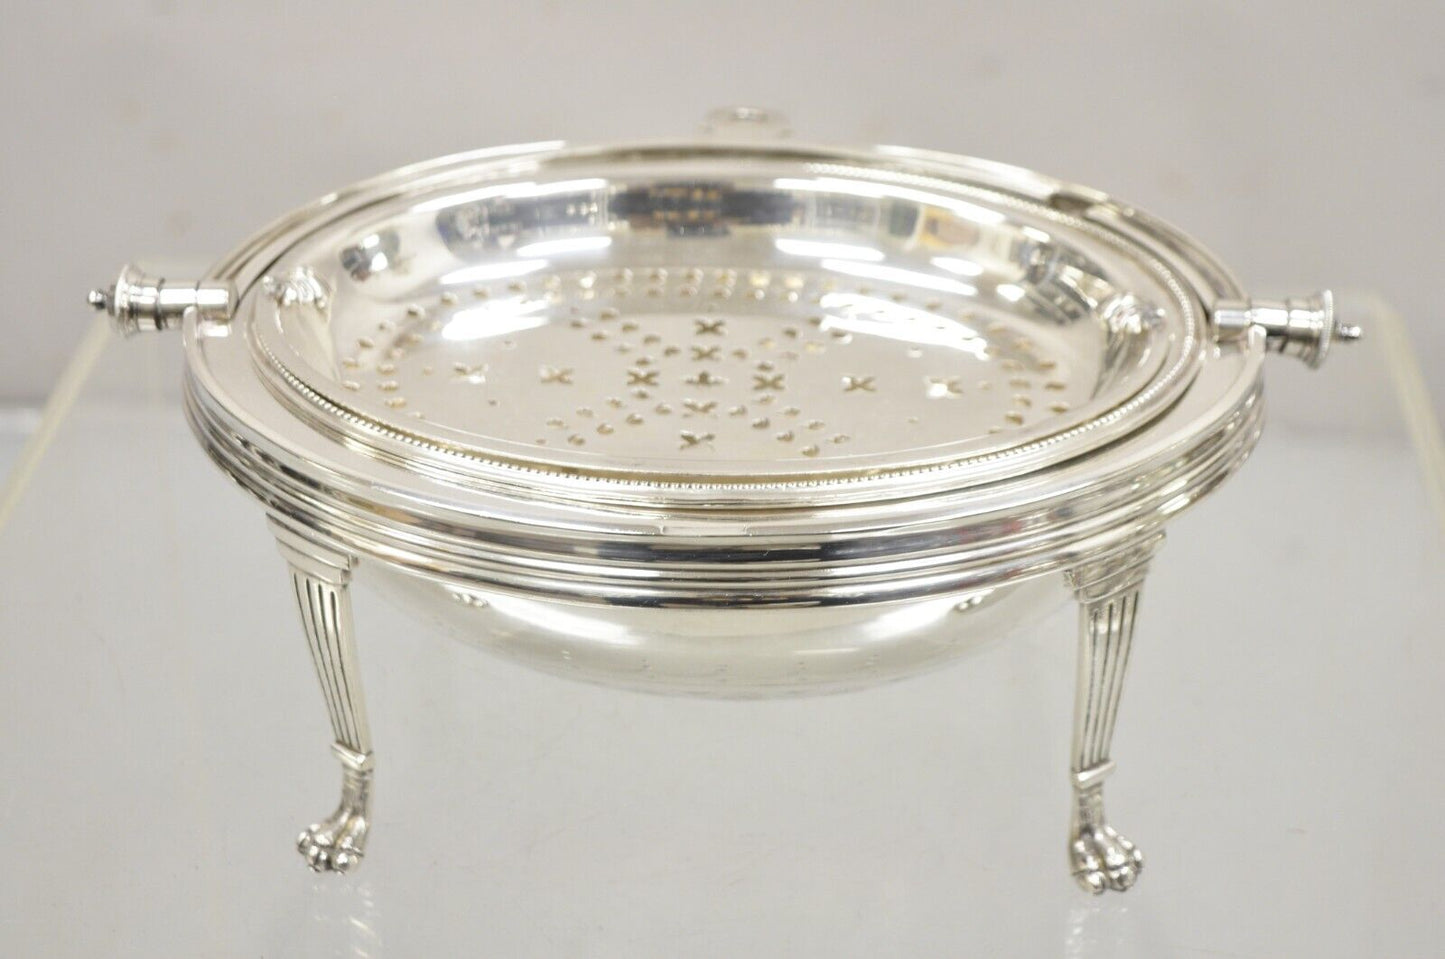 English Regency Victorian Silver Plated Revolving Dome Chafing Dish Warmer